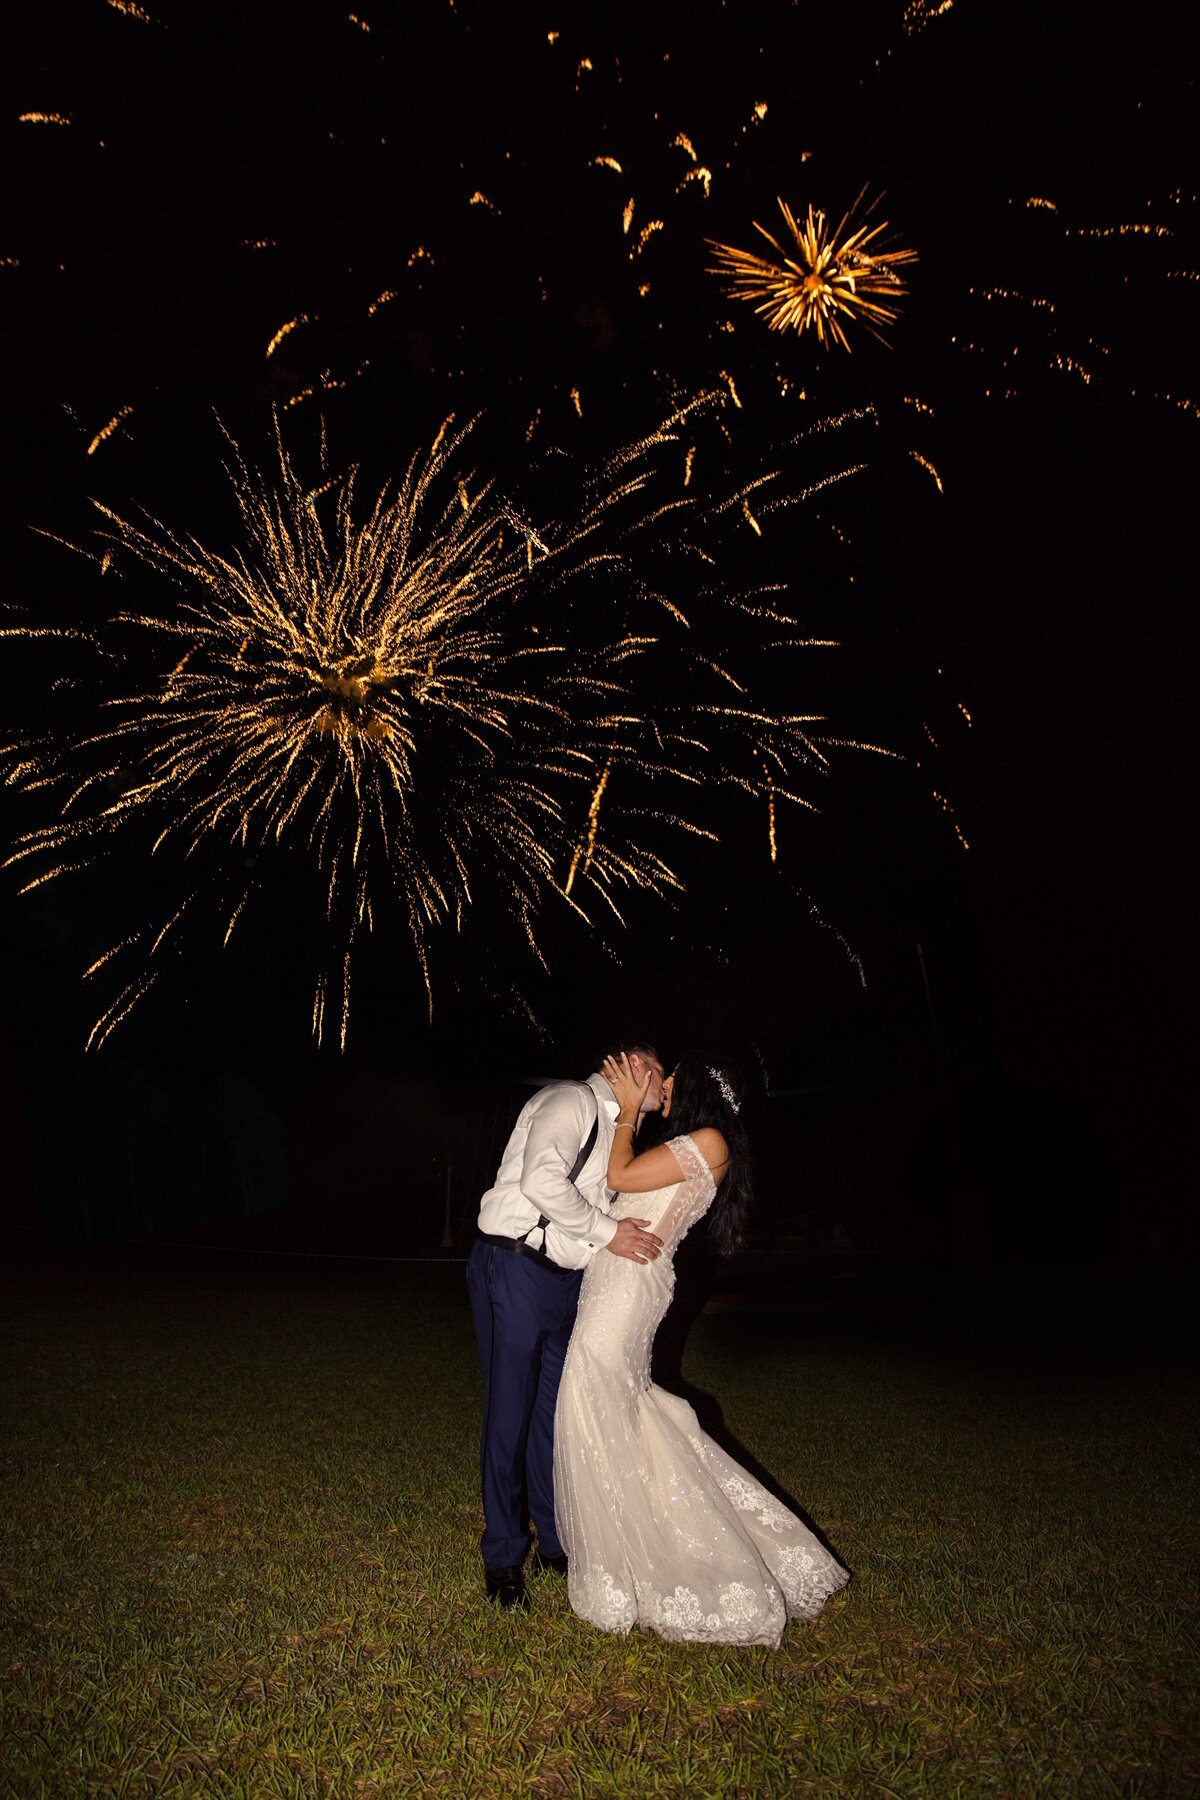 Fireworks display for the bride and groom